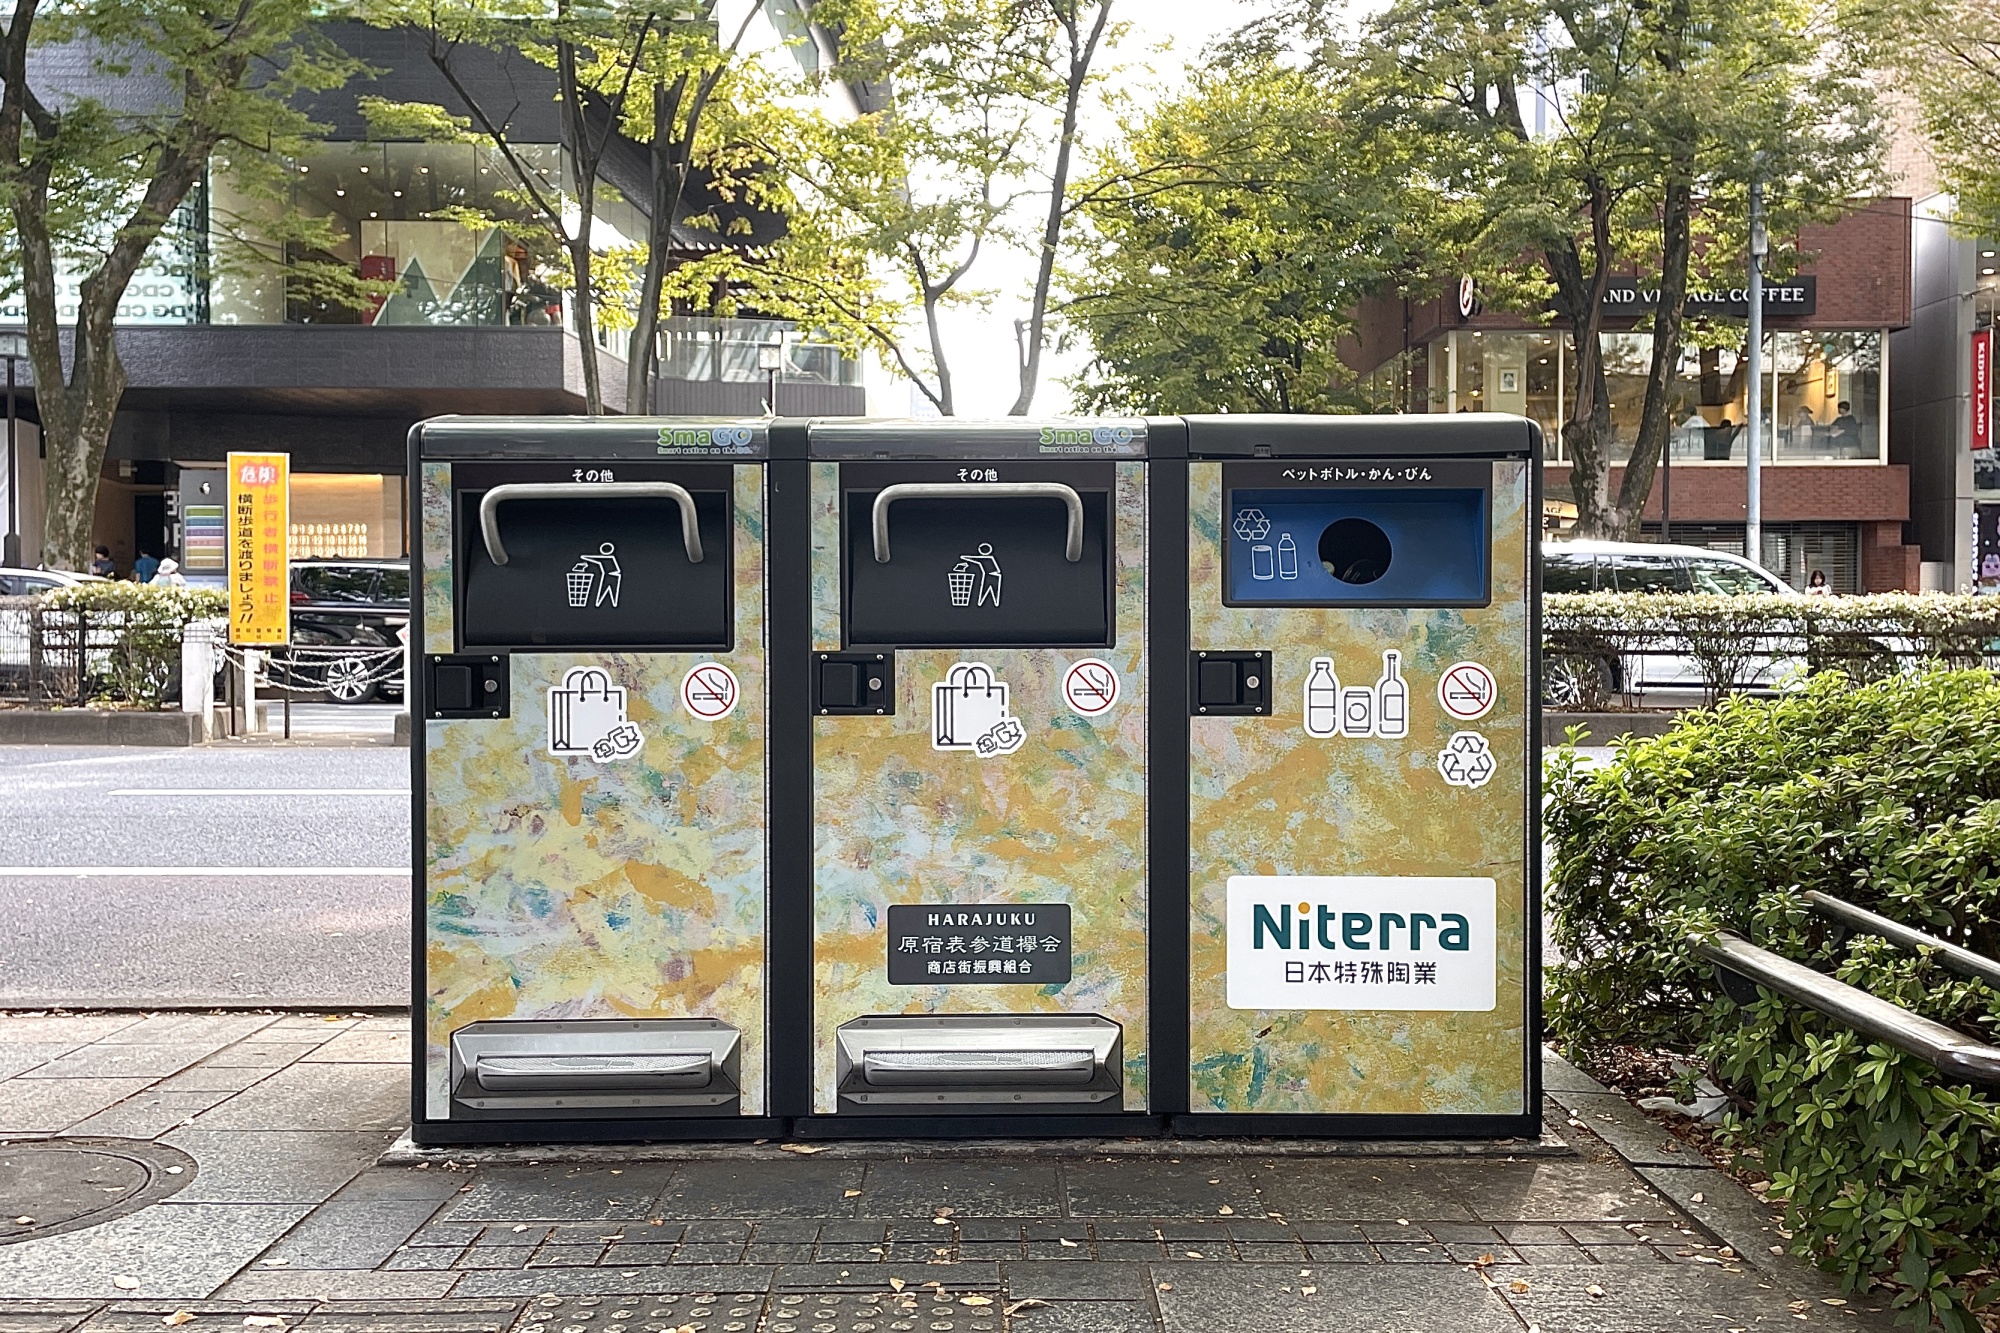 Japan Starts Using Smart Trash Cans as Tourists Bring Garbage Problem to  Cities - Bloomberg